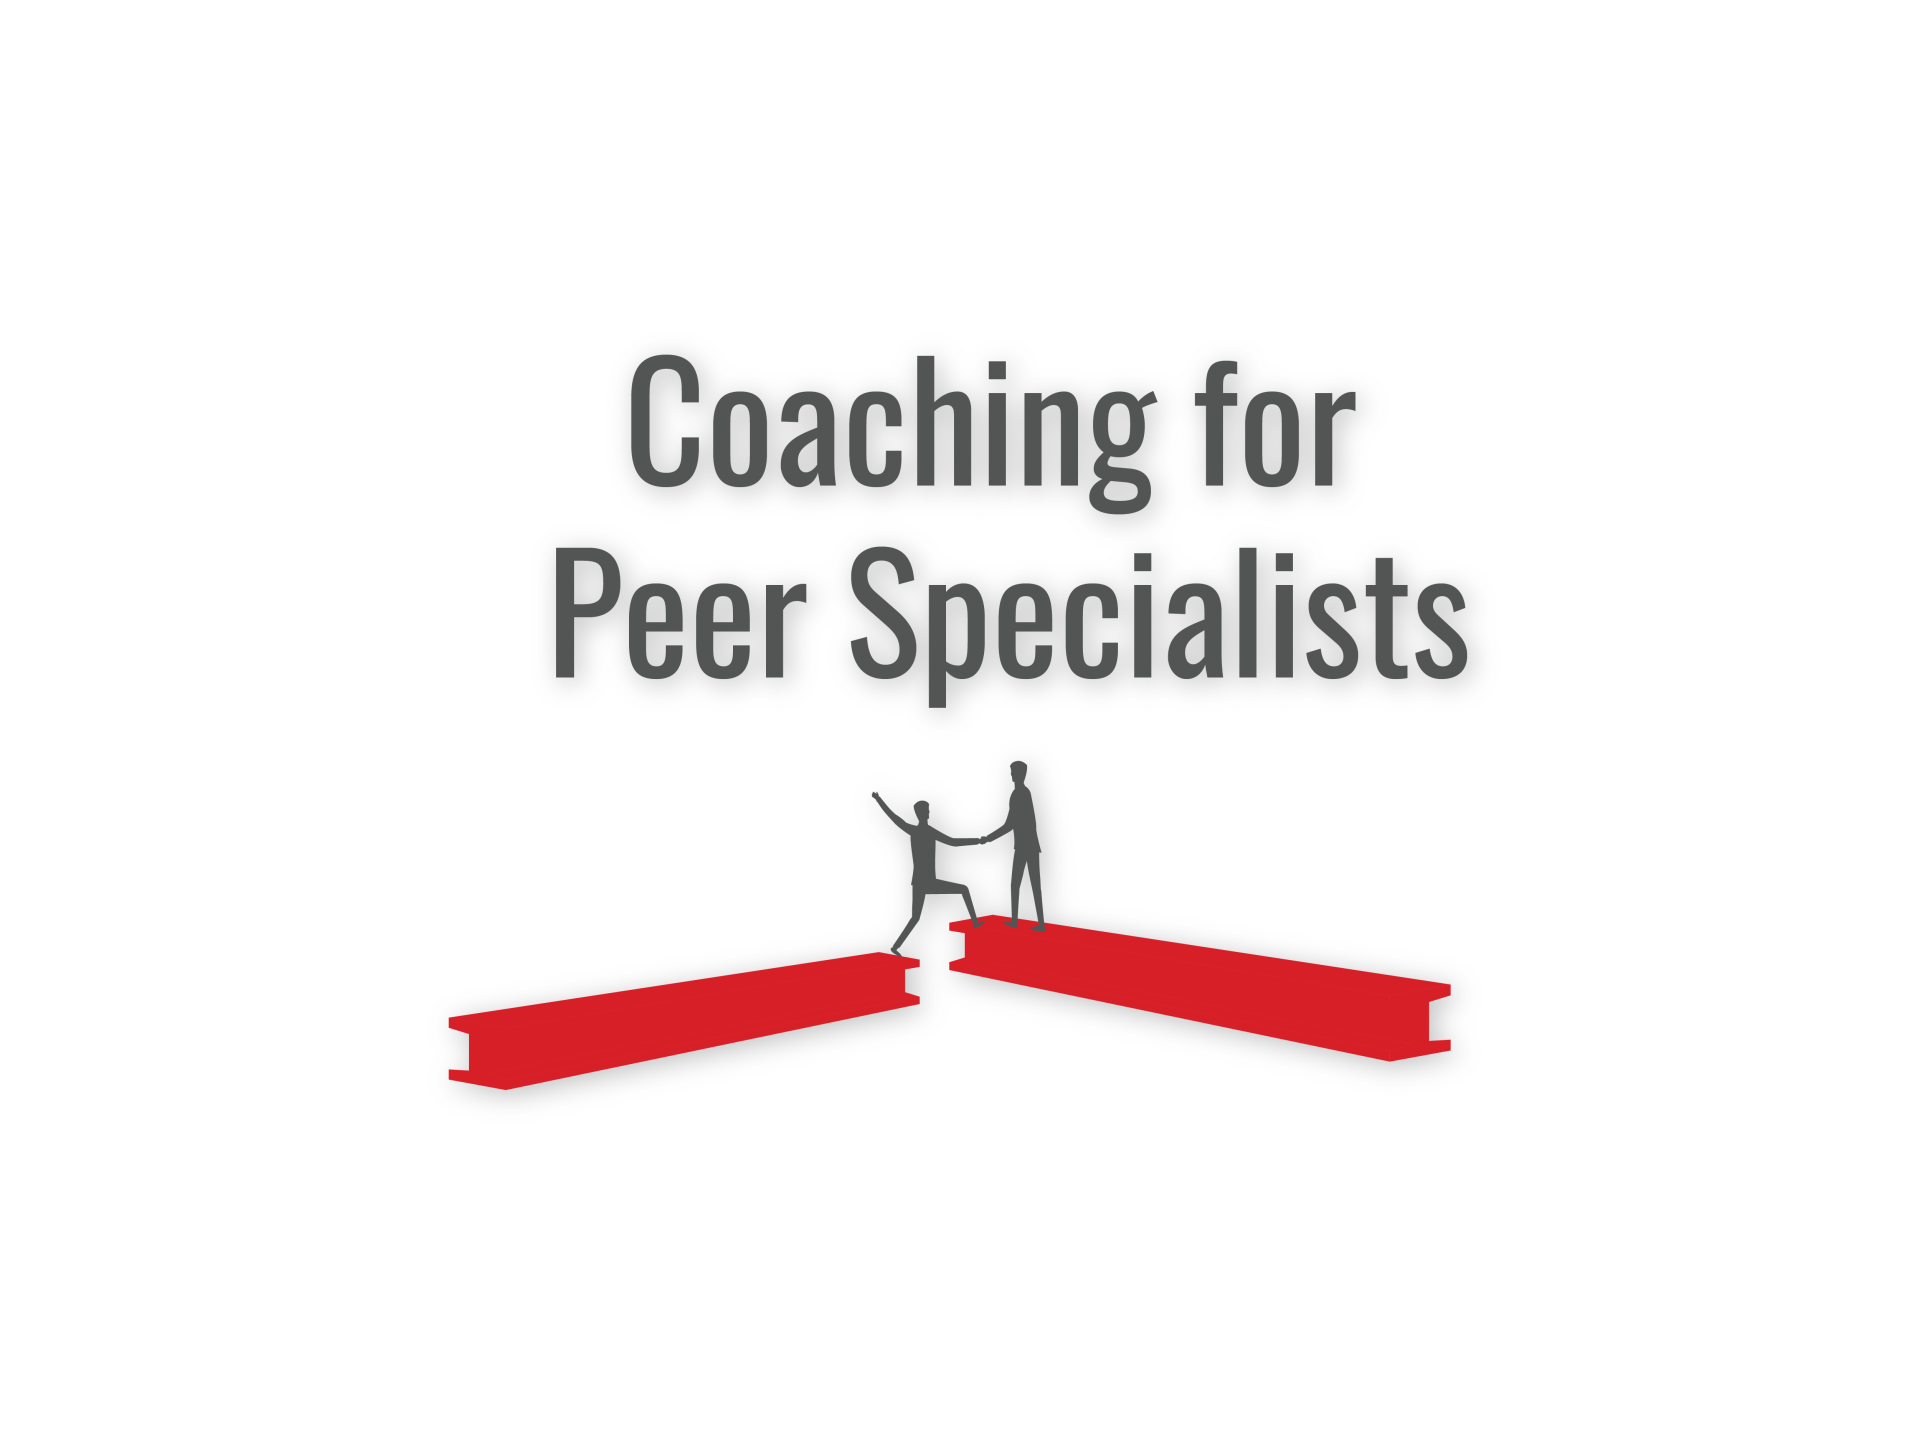 Coaching for Peer Specialists